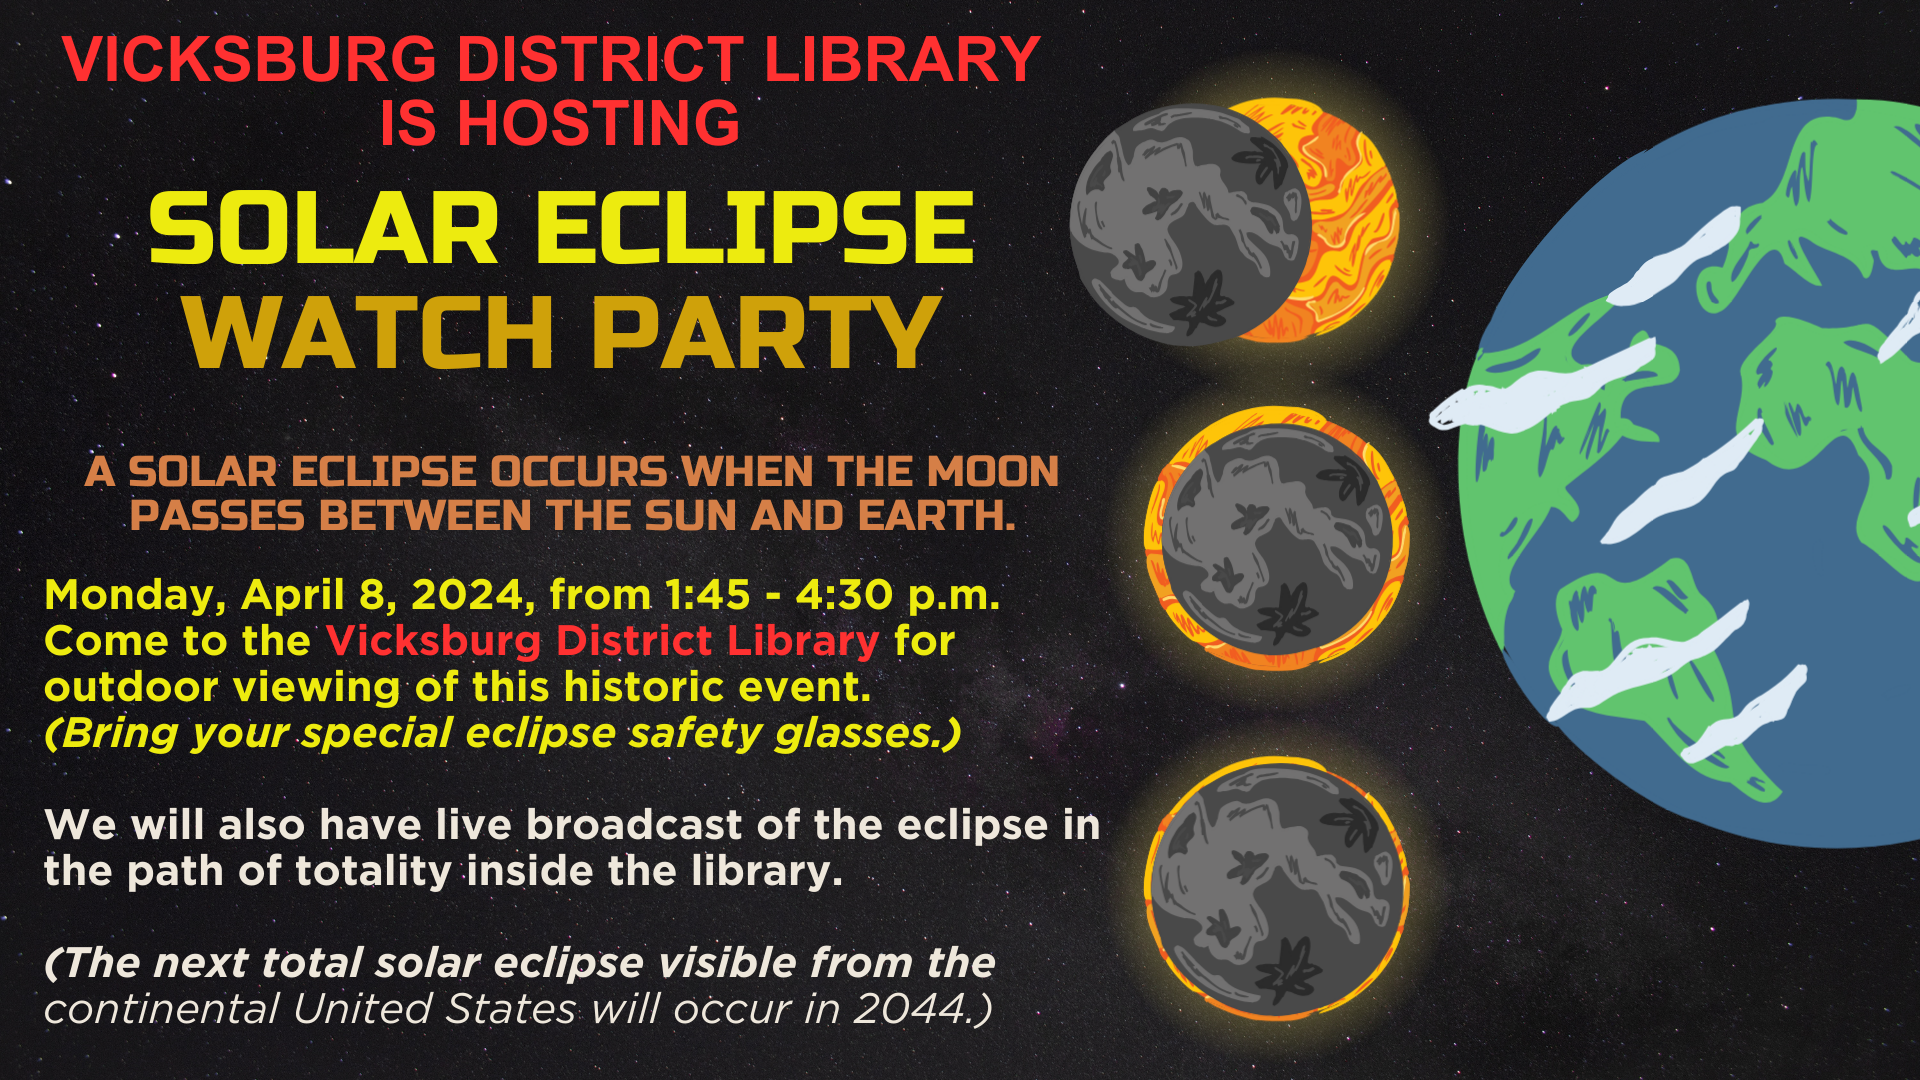 Solar eclipse watch party at the VDL on April 8 from 1:45-4:30pm